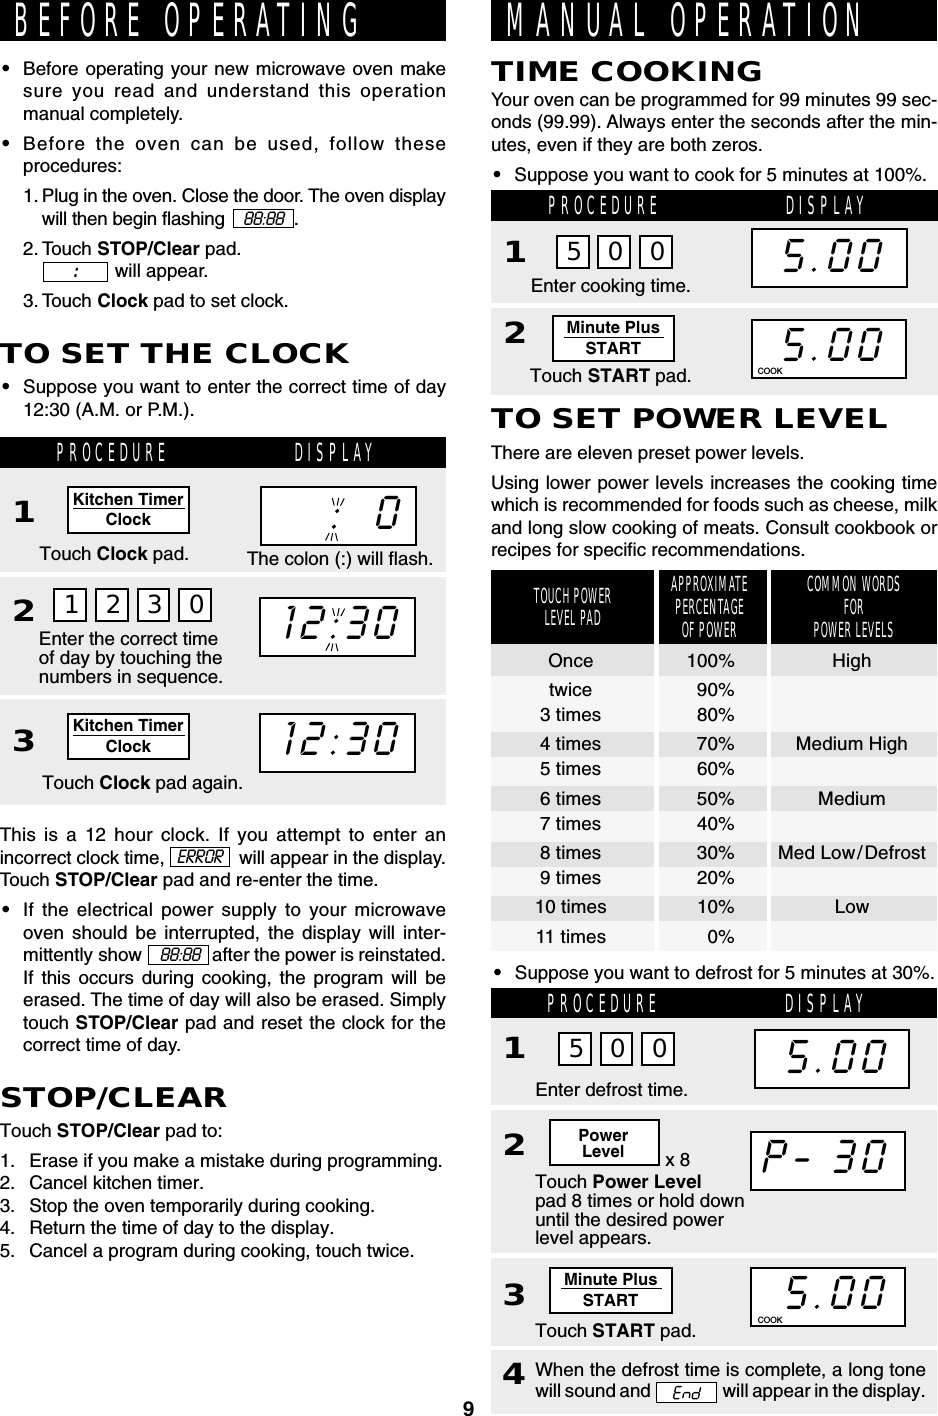 9Kitchen TimerClockKitchen TimerClockMinute PlusSTARTPowerLevel x 8Minute PlusSTART12:30:  0BEFORE OPERATING•Before operating your new microwave oven makesure you read and understand this operationmanual completely.•Before the oven can be used, follow theseprocedures:1. Plug in the oven. Close the door. The oven displaywill then begin flashing     88:88   .2. Touch STOP/Clear pad.              will appear.3. Touch Clock pad to set clock.:::::TO SET THE CLOCK•Suppose you want to enter the correct time of day12:30 (A.M. or P.M.).1 2 3 0PROCEDURE DISPLAY1Touch Clock pad.Enter the correct timeof day by touching thenumbers in sequence.23Touch Clock pad again.12:30This is a 12 hour clock. If you attempt to enter anincorrect clock time,               will appear in the display.Touch STOP/Clear pad and re-enter the time.•If the electrical power supply to your microwaveoven should be interrupted, the display will inter-mittently show      88:88   after the power is reinstated.If this occurs during cooking, the program will beerased. The time of day will also be erased. Simplytouch STOP/Clear pad and reset the clock for thecorrect time of day.STOP/CLEARTouch STOP/Clear pad to:1. Erase if you make a mistake during programming.2. Cancel kitchen timer.3. Stop the oven temporarily during cooking.4. Return the time of day to the display.5. Cancel a program during cooking, touch twice.MANUAL OPERATIONYour oven can be programmed for 99 minutes 99 sec-onds (99.99). Always enter the seconds after the min-utes, even if they are both zeros.•Suppose you want to cook for 5 minutes at 100%.TIME COOKINGPROCEDURE DISPLAY1Enter cooking time.Touch START pad.25.005.005 0 0TO SET POWER LEVELThere are eleven preset power levels.Using lower power levels increases the cooking timewhich is recommended for foods such as cheese, milkand long slow cooking of meats. Consult cookbook orrecipes for specific recommendations.COOKThe colon (:) will flash.ERROR•Suppose you want to defrost for 5 minutes at 30%.APPROXIMATEPERCENTAGEOF POWERCOMMON WORDSFORPOWER LEVELSTOUCH POWERLEVEL PADOnce 100% Hightwice 90%3 times 80%4 times 70% Medium High5 times 60%6 times 50% Medium7 times 40%8 times 30% Med Low/Defrost9 times 20%10 times 10% Low11 times 0%P-.30PROCEDURE DISPLAY1Touch Power Levelpad 8 times or hold downuntil the desired powerlevel appears.235.00Enter defrost time.5.005 0 0Touch START pad.4When the defrost time is complete, a long tonewill sound and   will appear in the display.COOK